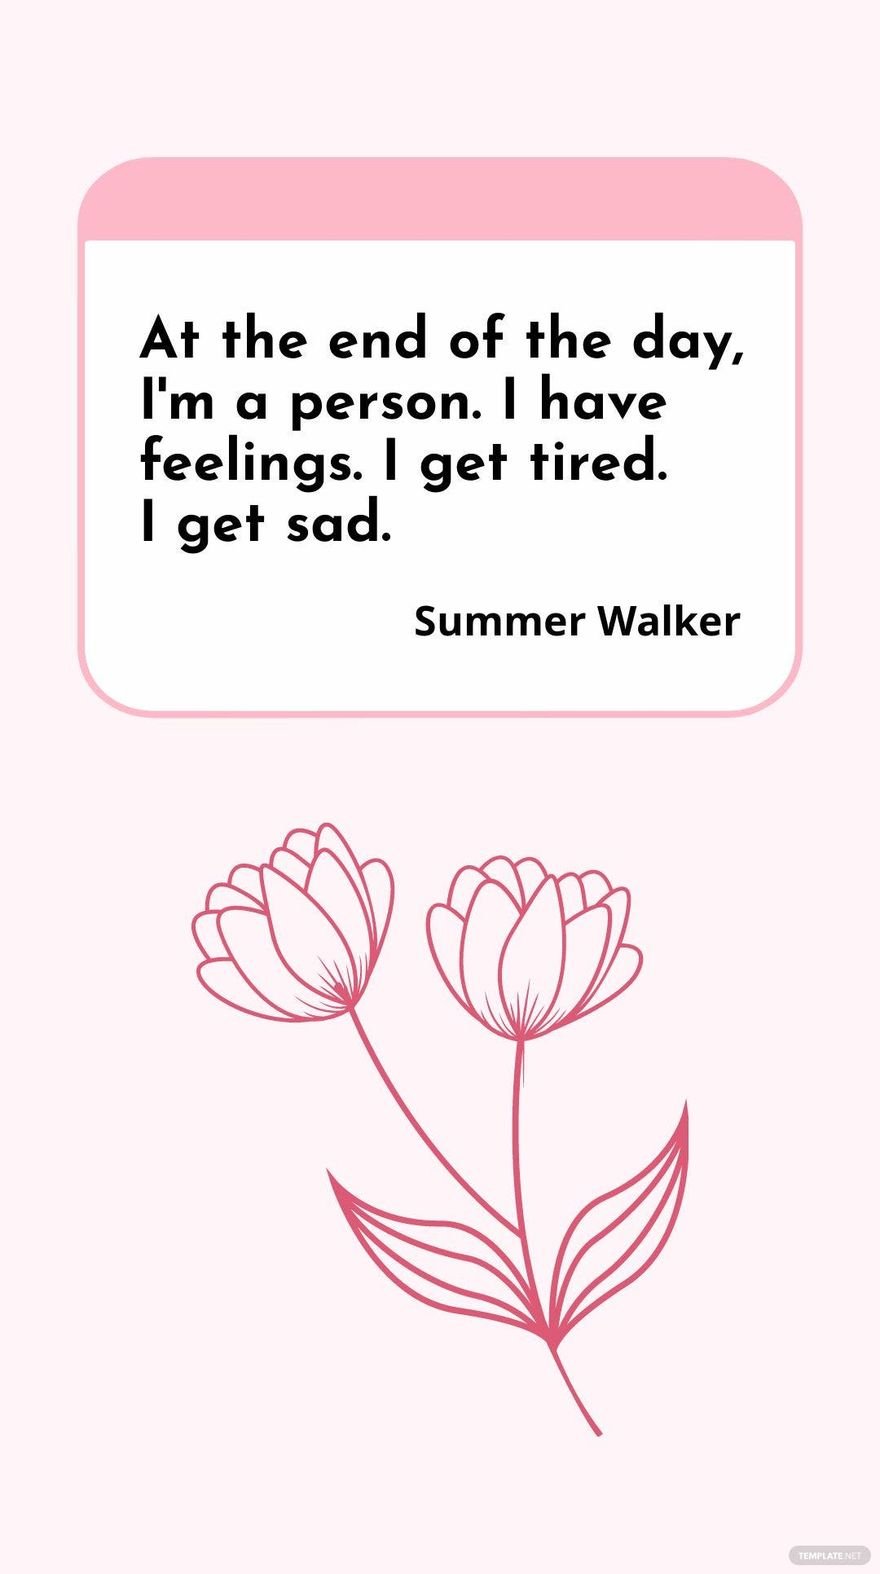 Summer Walker - At the end of the day, I'm a person. I have feelings. I get tired. I get sad.